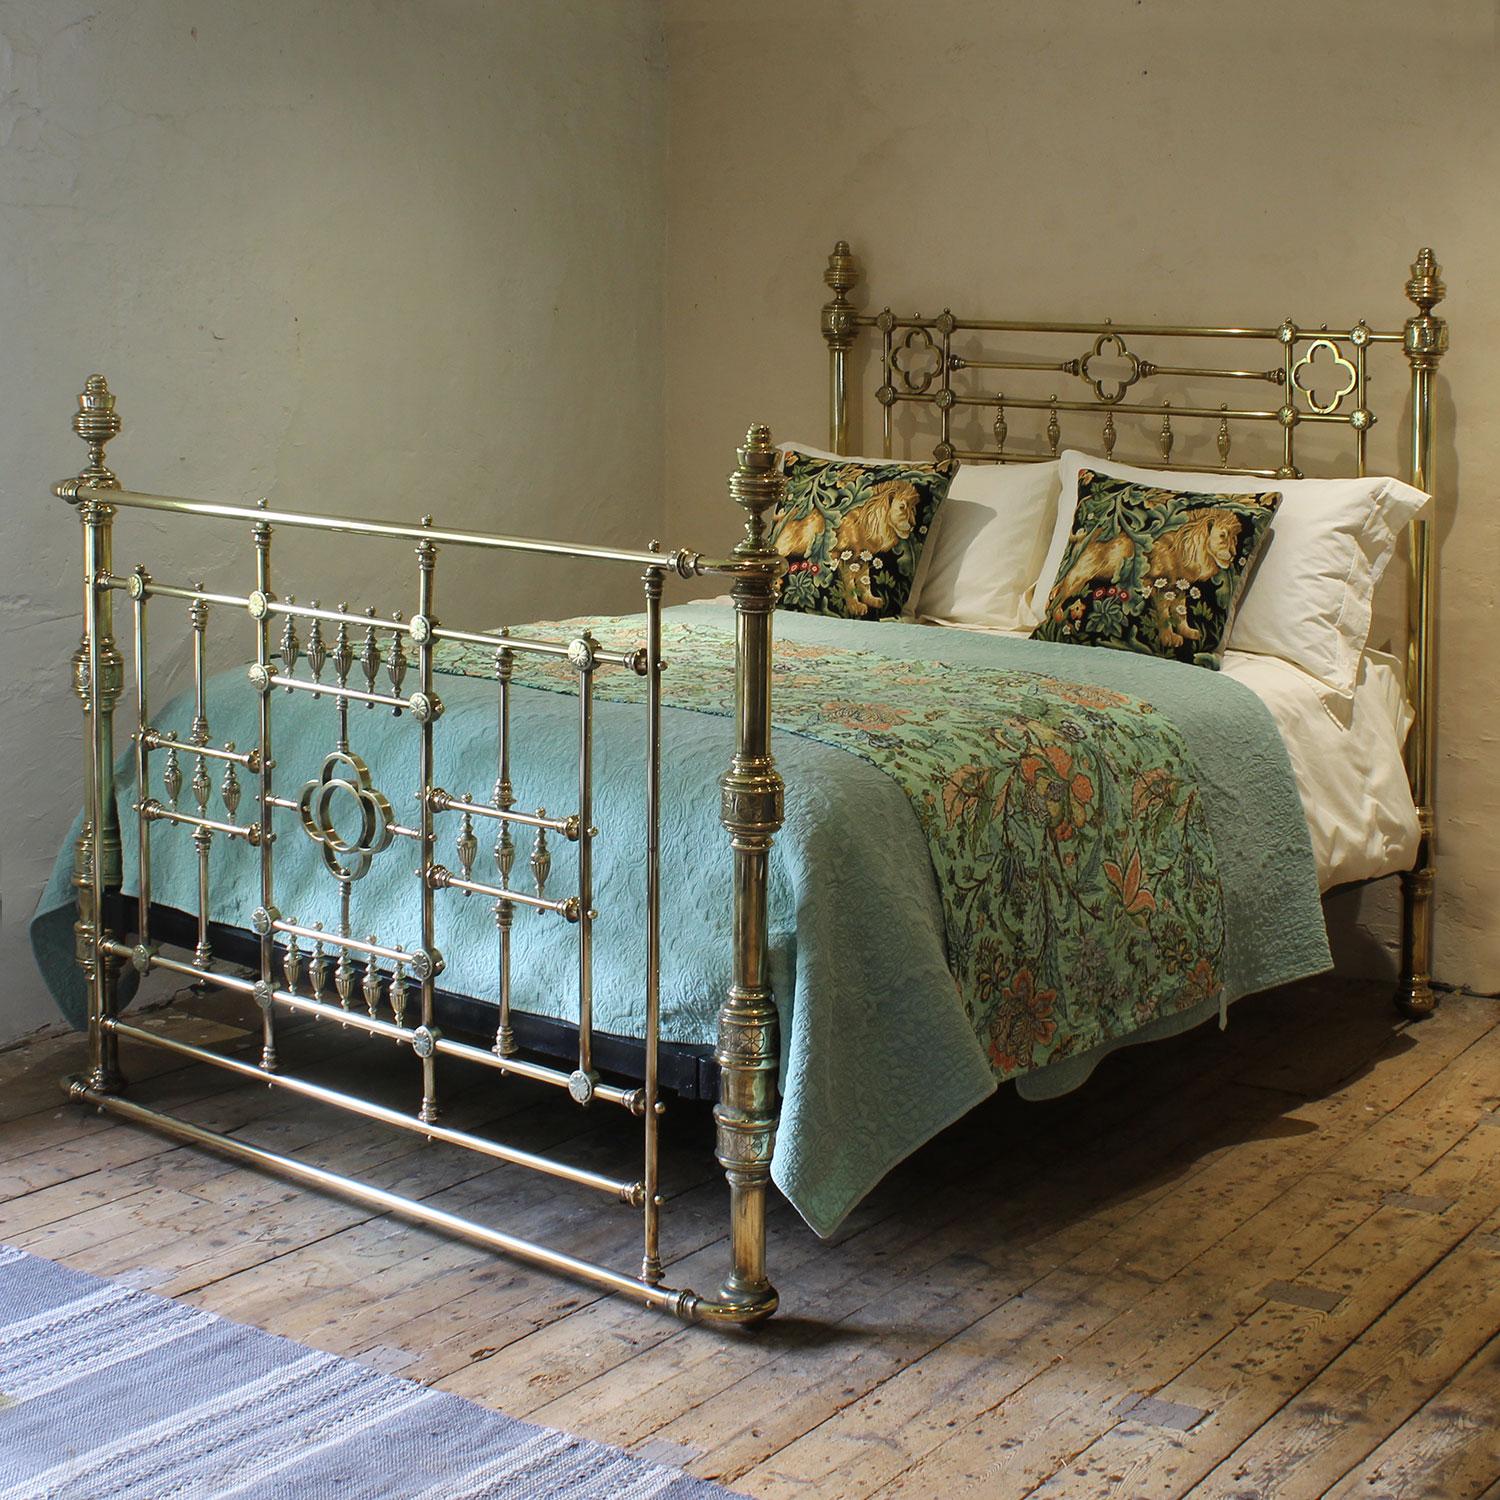 A magnificent top quality all brass Victorian antique bed with bow foot and decorative features including urns and clover rings.
This bed has the original patina of 150 years, but we can repolish and lacquer if required. Please ask for a